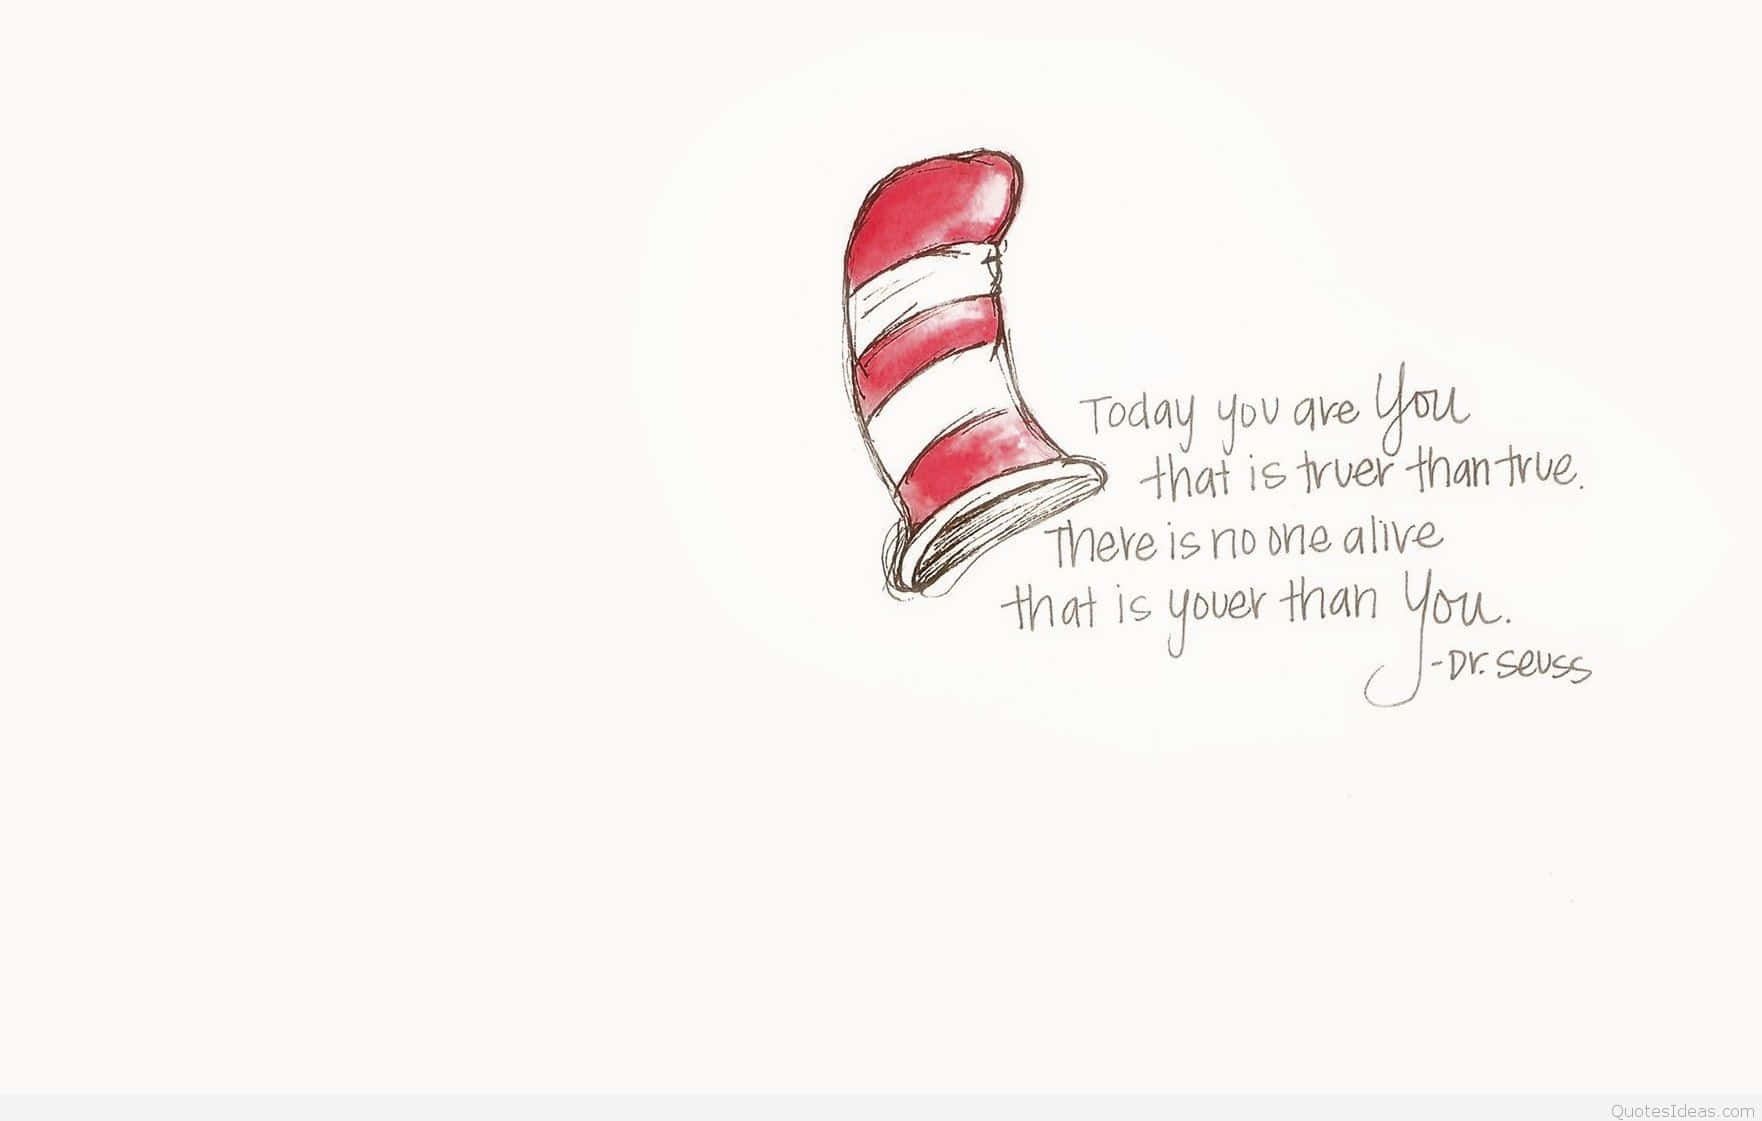 "Be who you are and say what you feel, because those who matter don't mind and those who mind don't matter - Dr. Seuss" Wallpaper